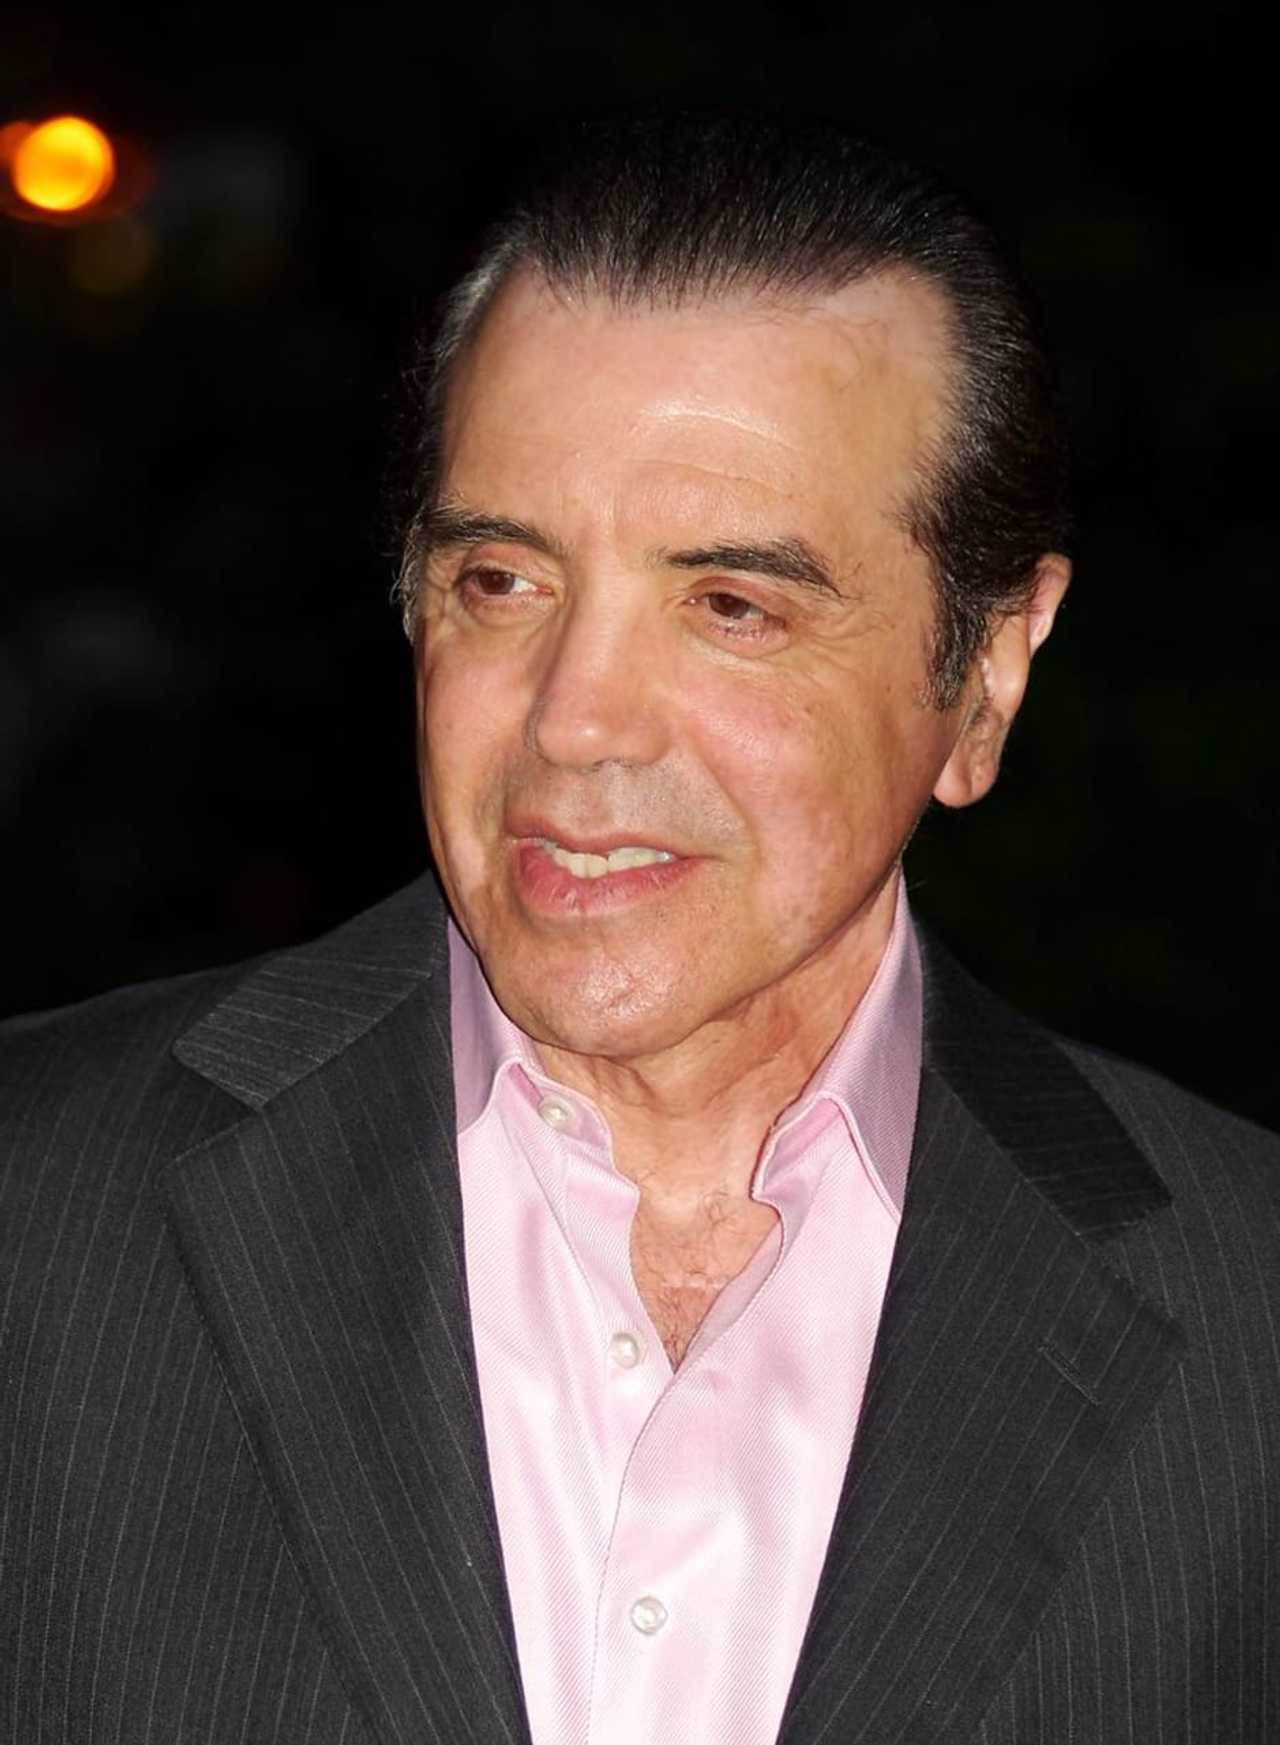 Bedford's Chazz Palminteri Bringing 'Bronx Tale' One-Man Show To Area Theaters